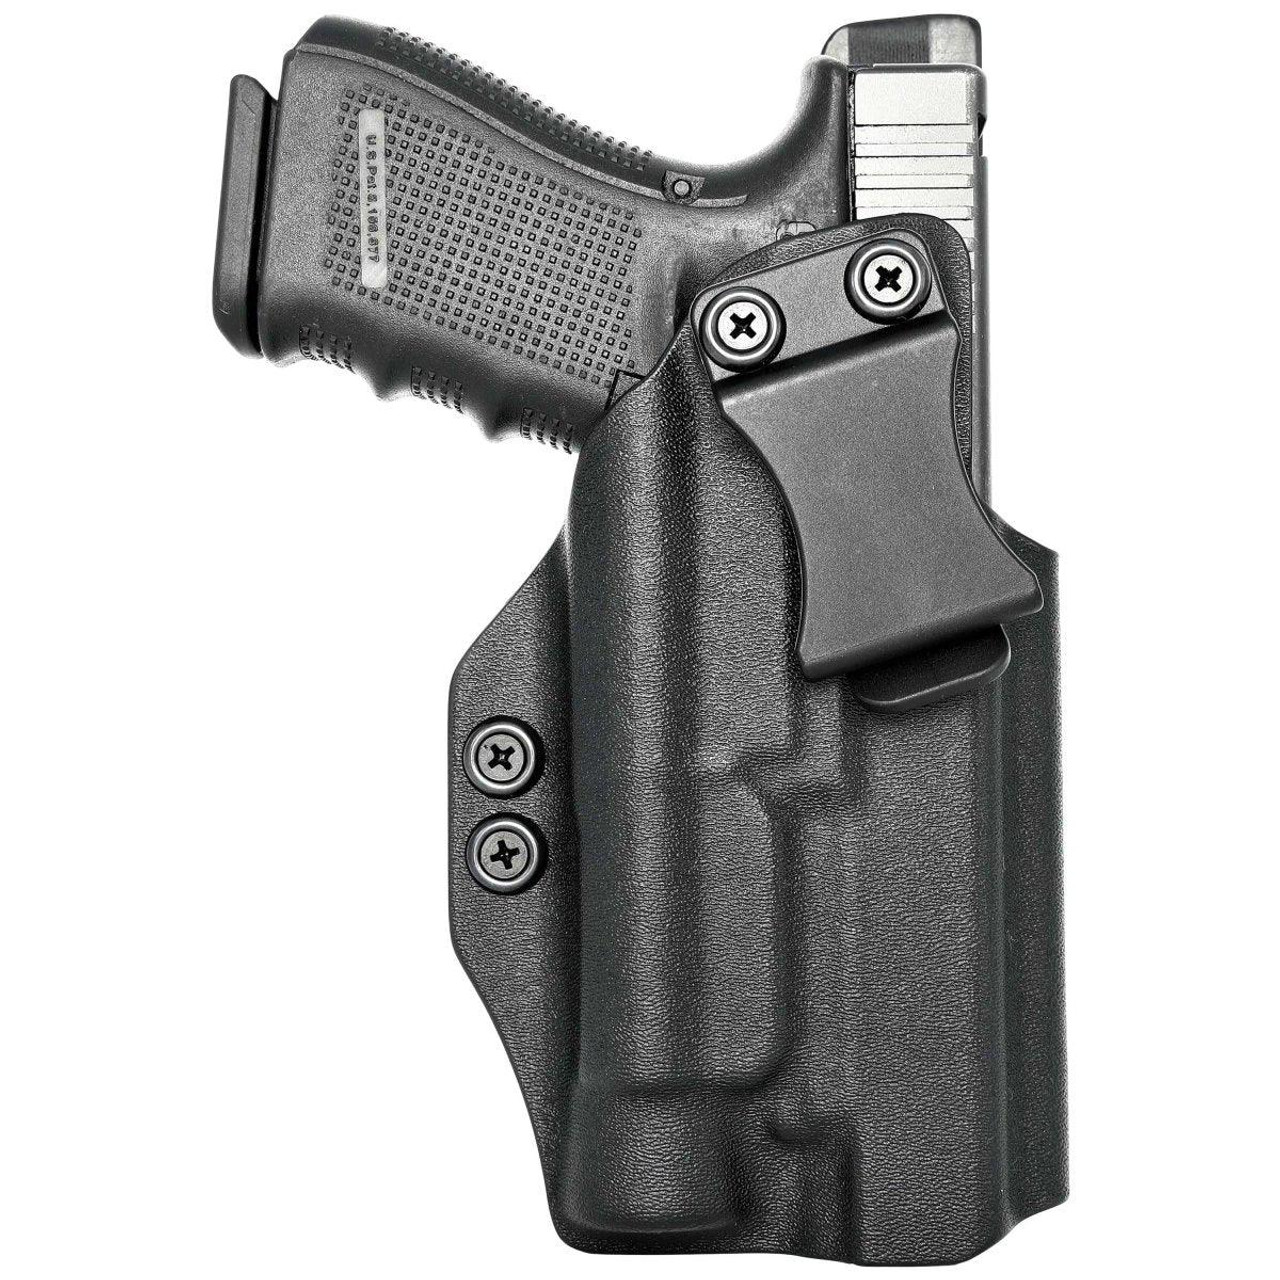 Glock 17 IWB Kydex Holster with Claw, Metal Belt Clip - Optic Ready, 0